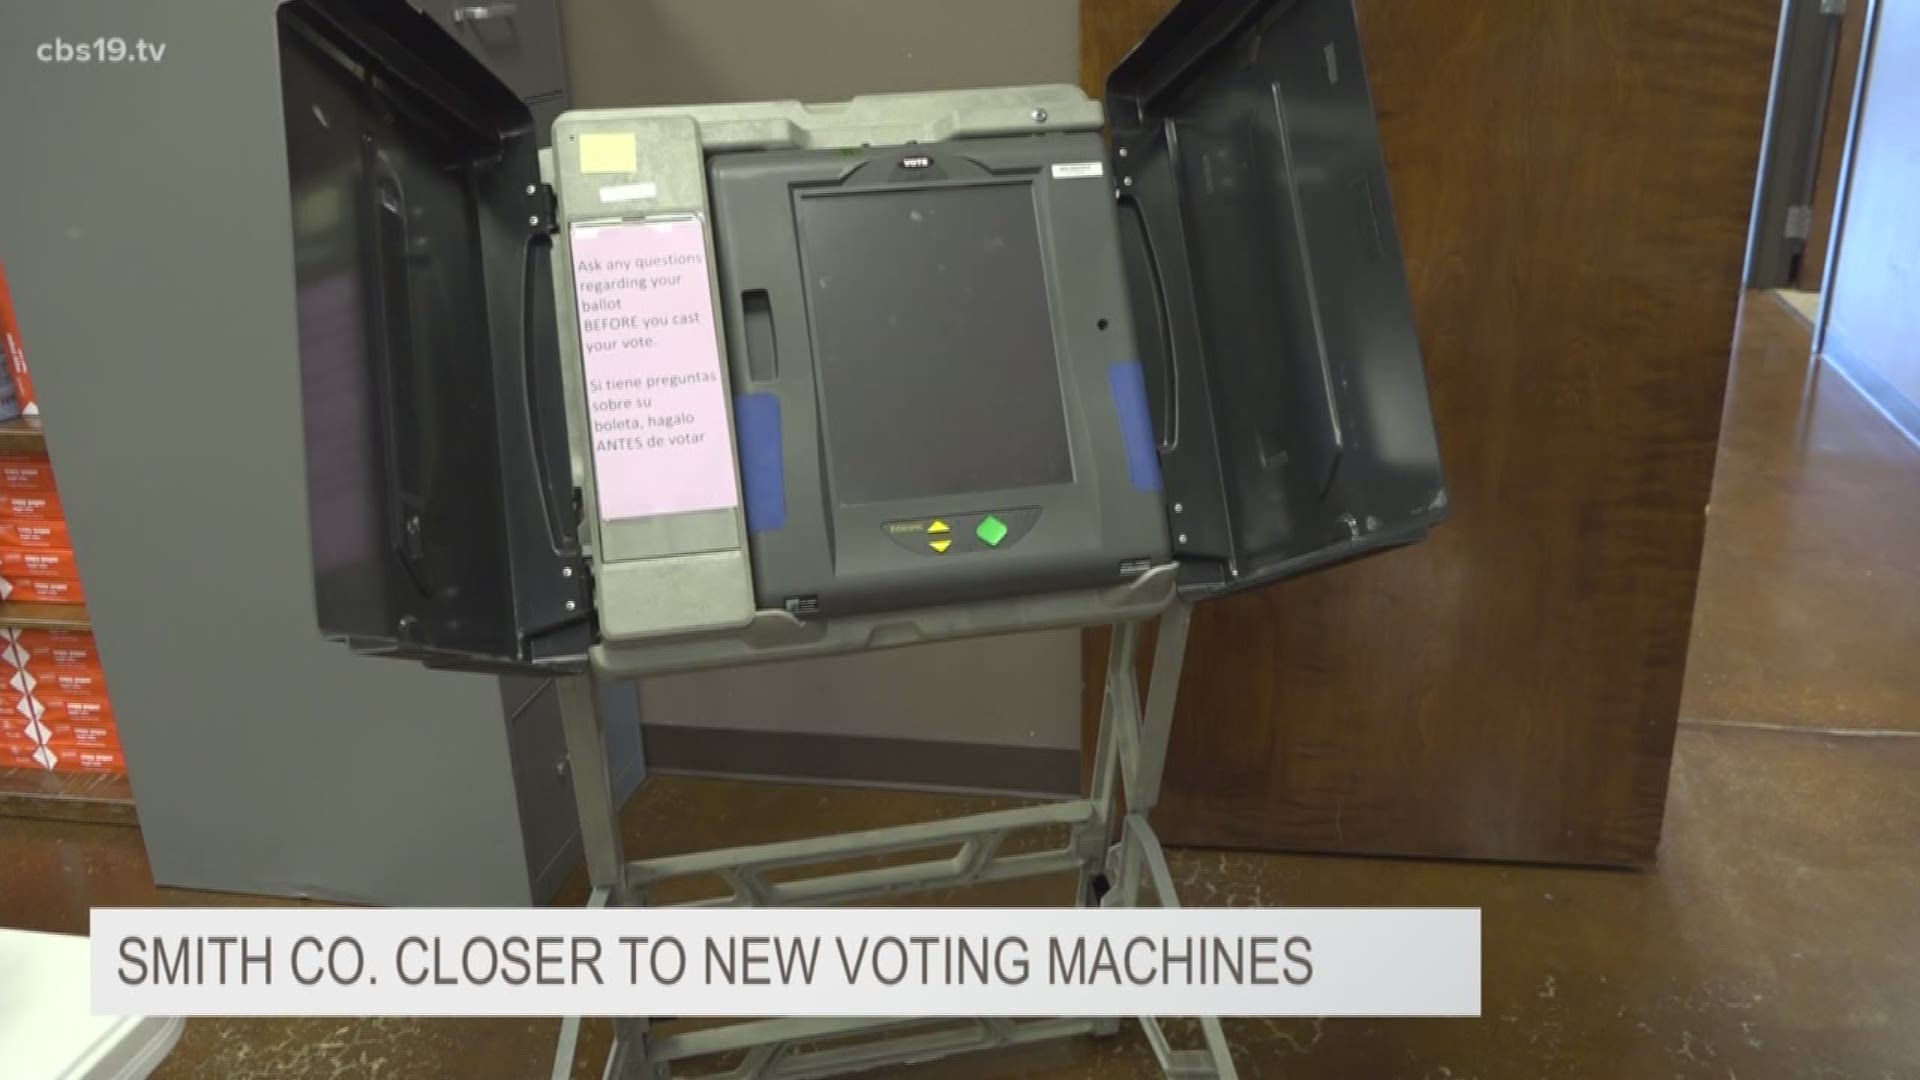 Smith Co. closer to new voting machines 